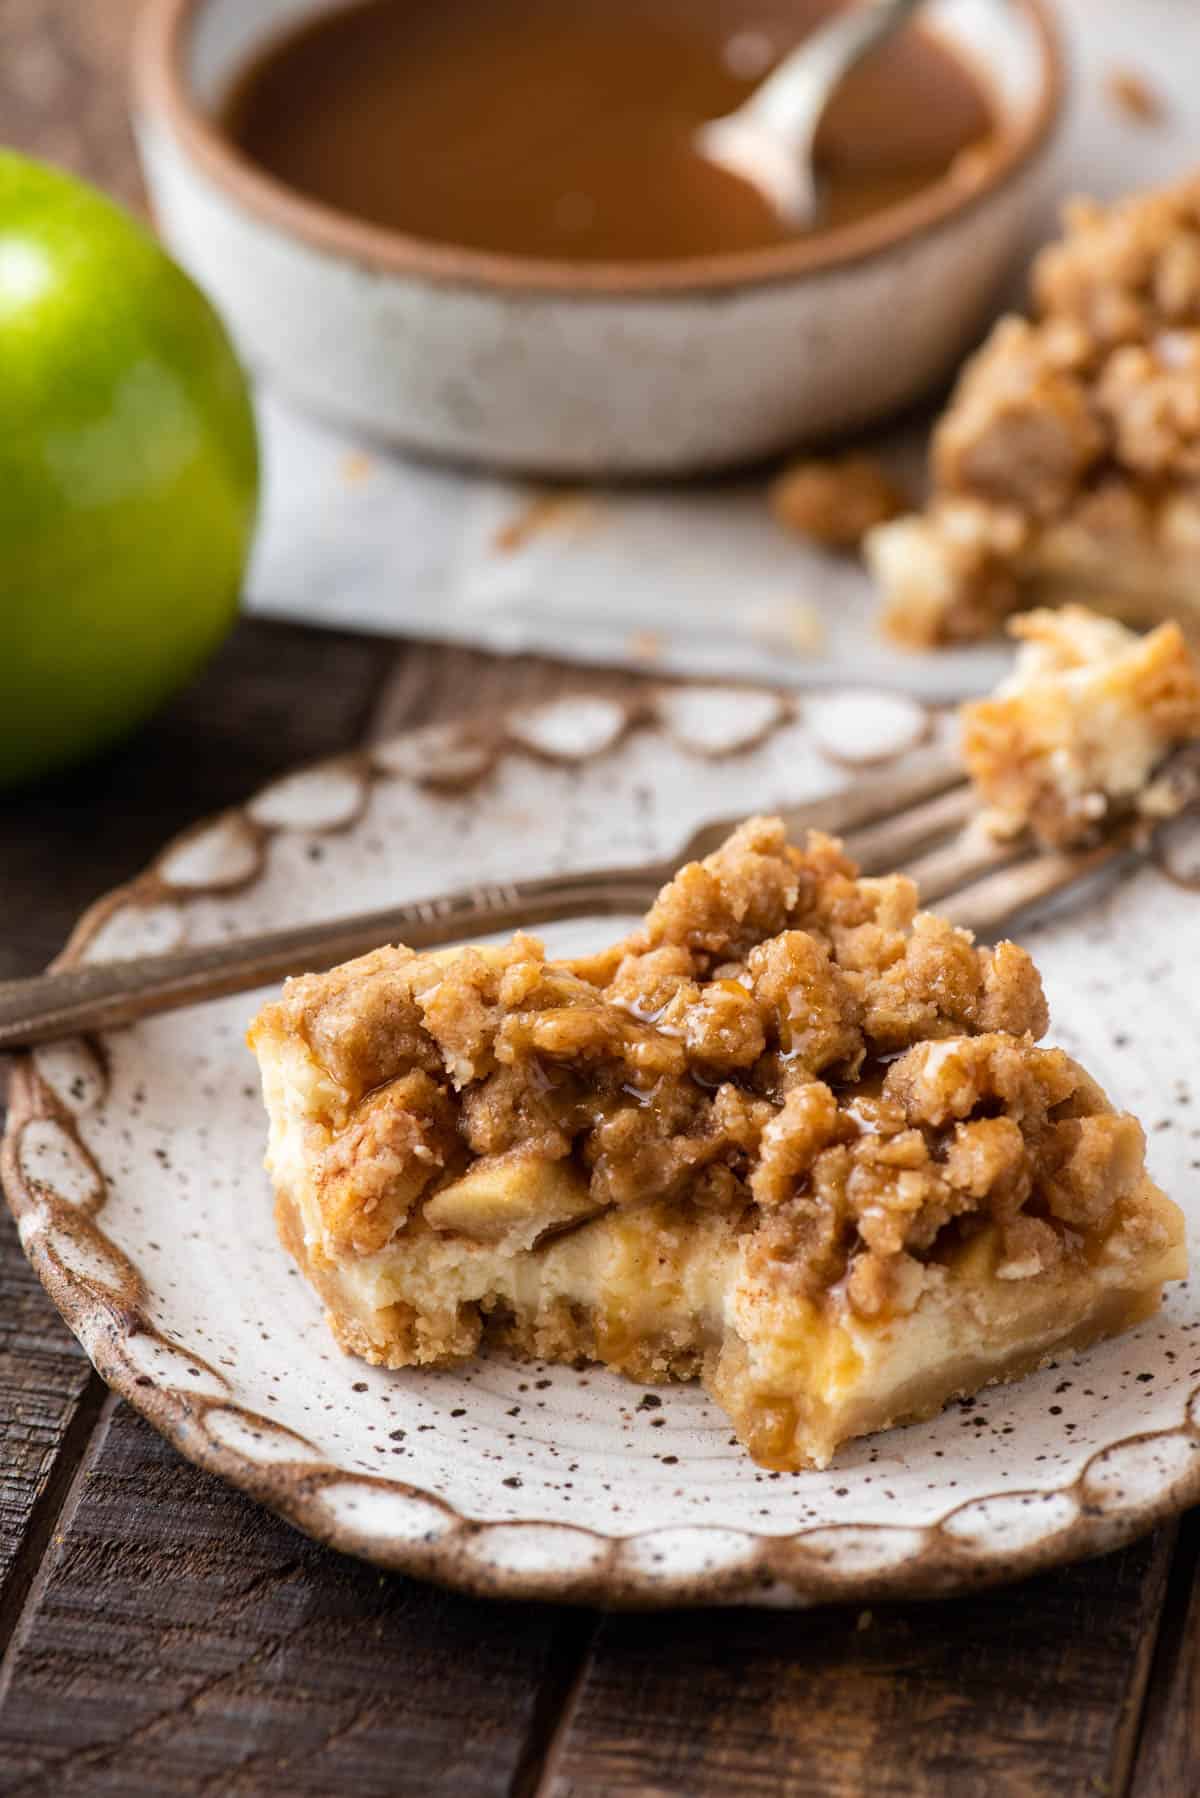 Caramel apple cheesecake bar on plate with bite taken out of corner